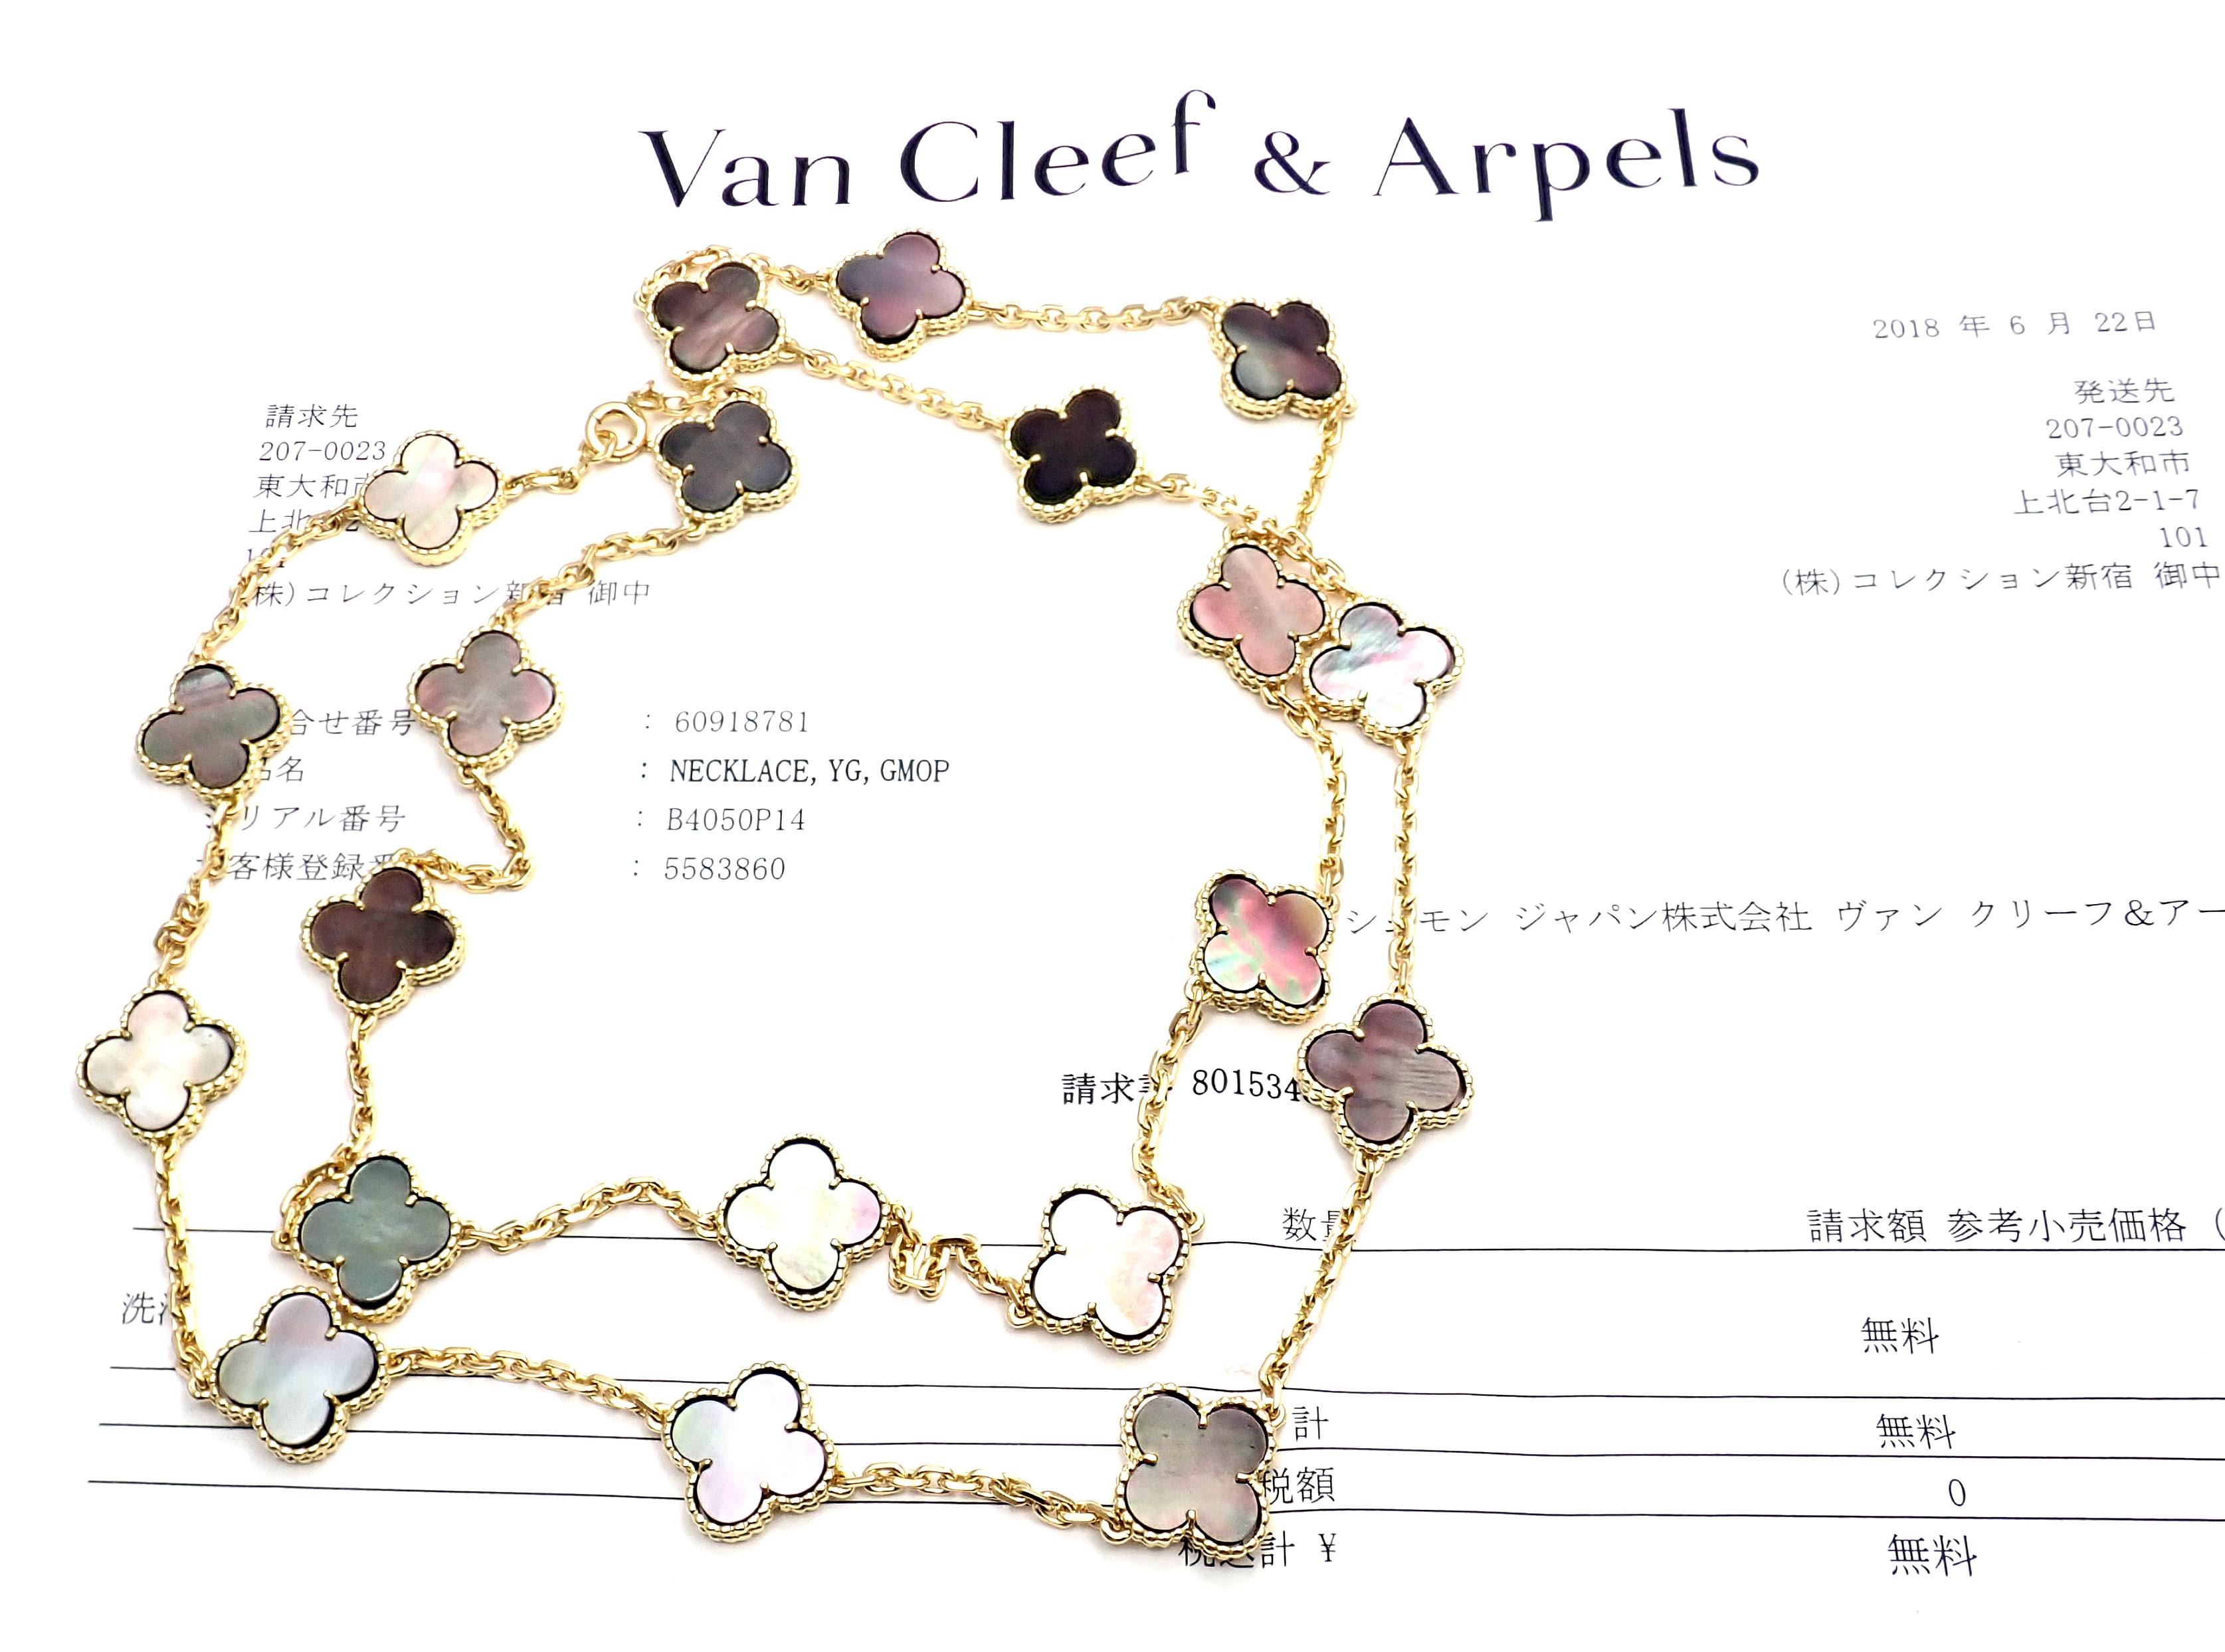 18k Yellow Gold Vintage 20 Alhambra Grey Mother Of Pearl Necklace by Van Cleef & Arpels.
With 20 motifs of grey mother of pearl alhambra stones 15mm each
This is a rare, very collectible, retired Van Cleef & Arpels grey mother of pearl Alhambra